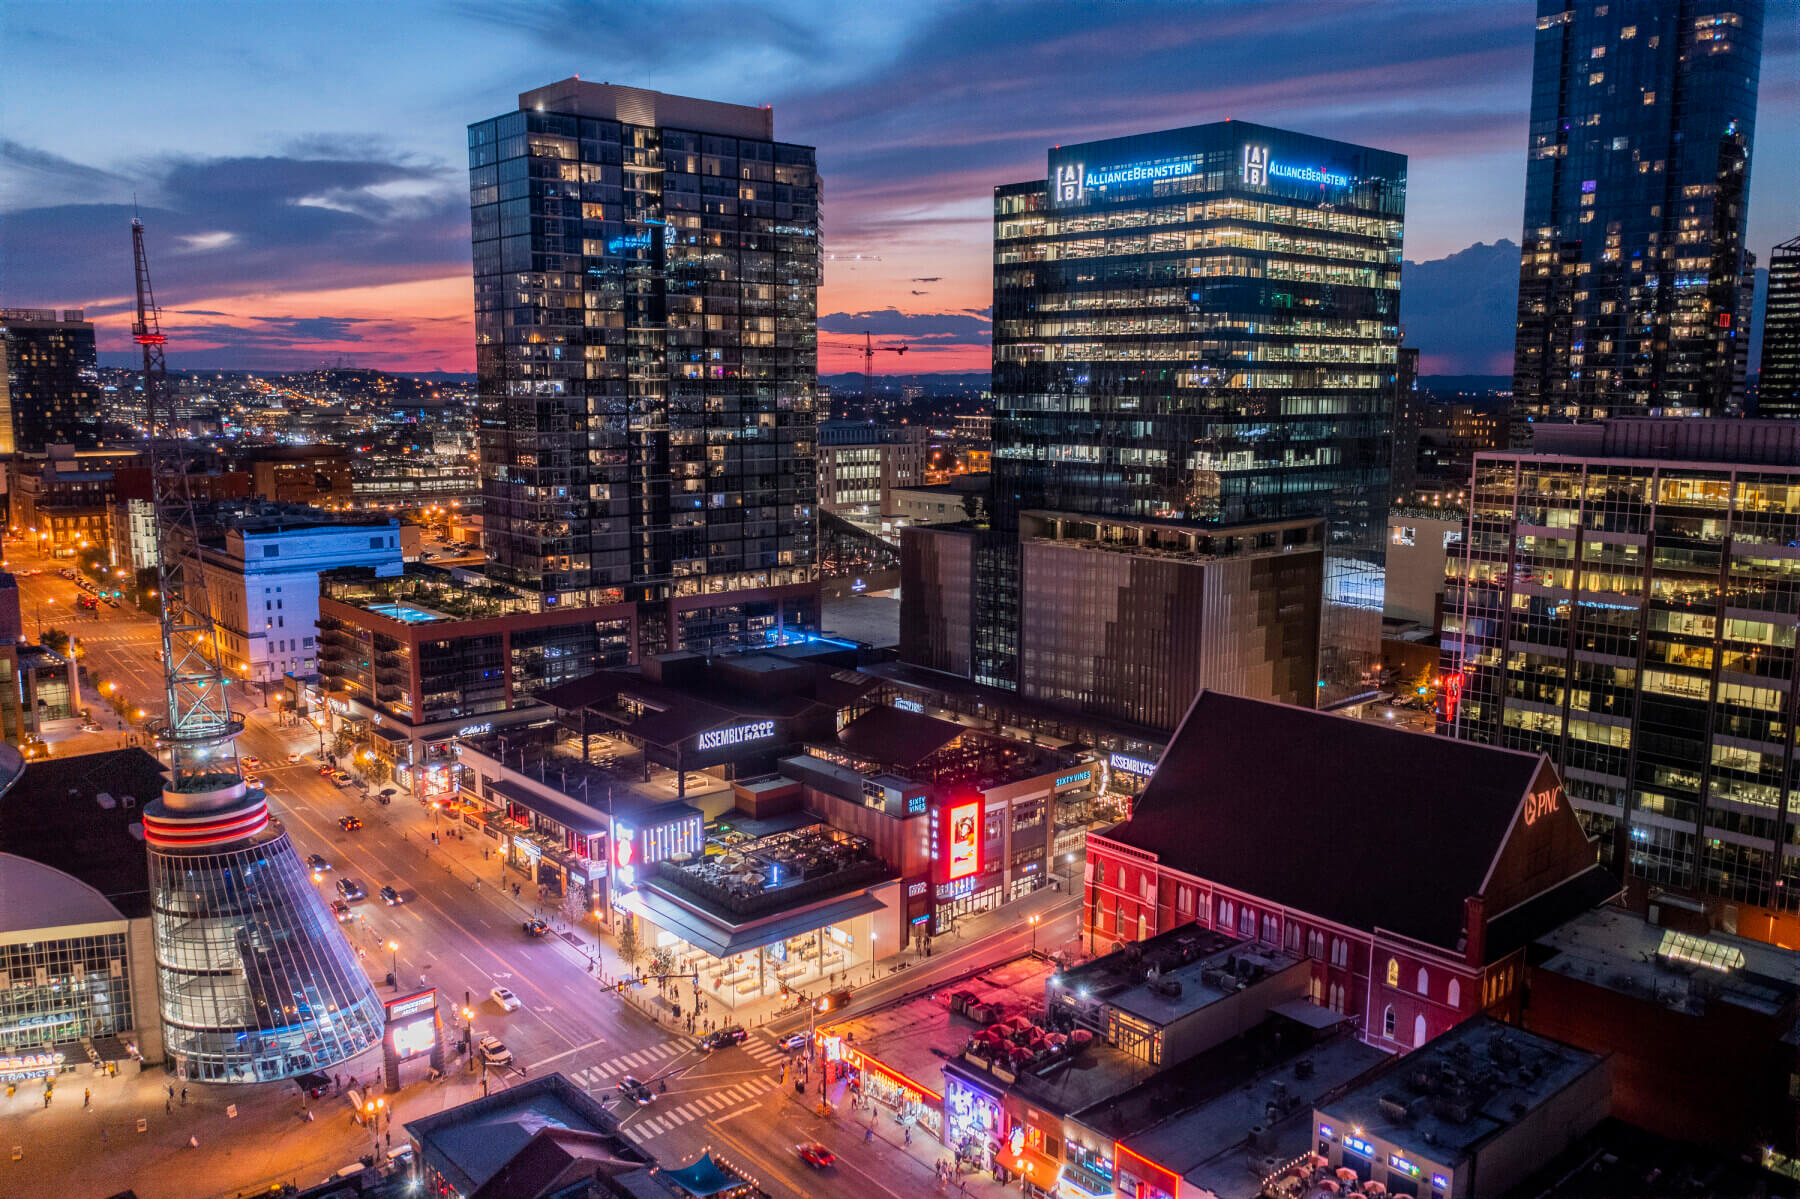 Aerial view of Fifth and Broadway at night